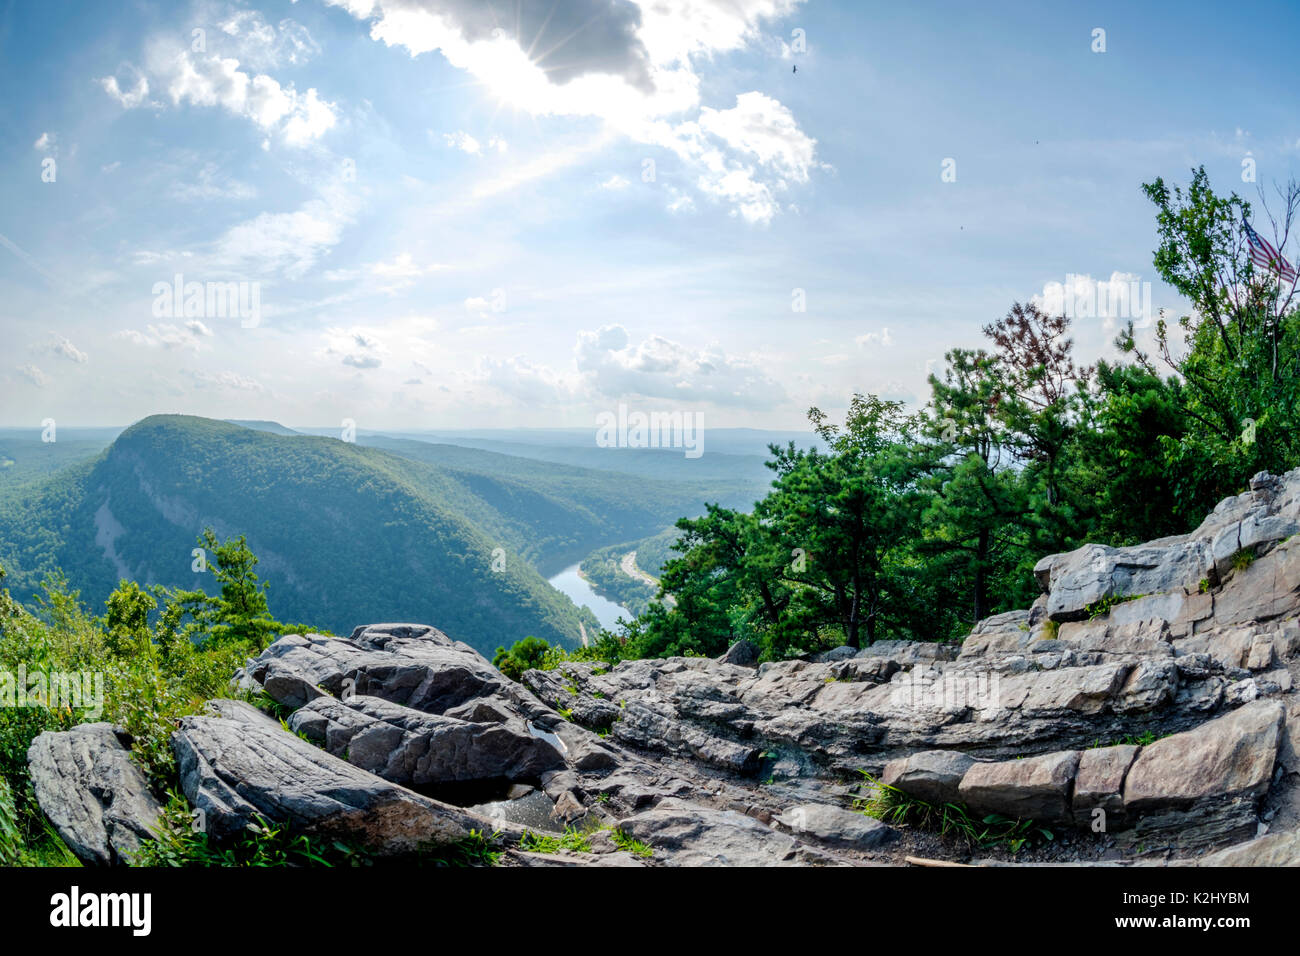 Amazing view from mount Tammany in New Jersey. Mountain and river on the  foreground. Sun shining through the clouds on the background Stock Photo -  Alamy